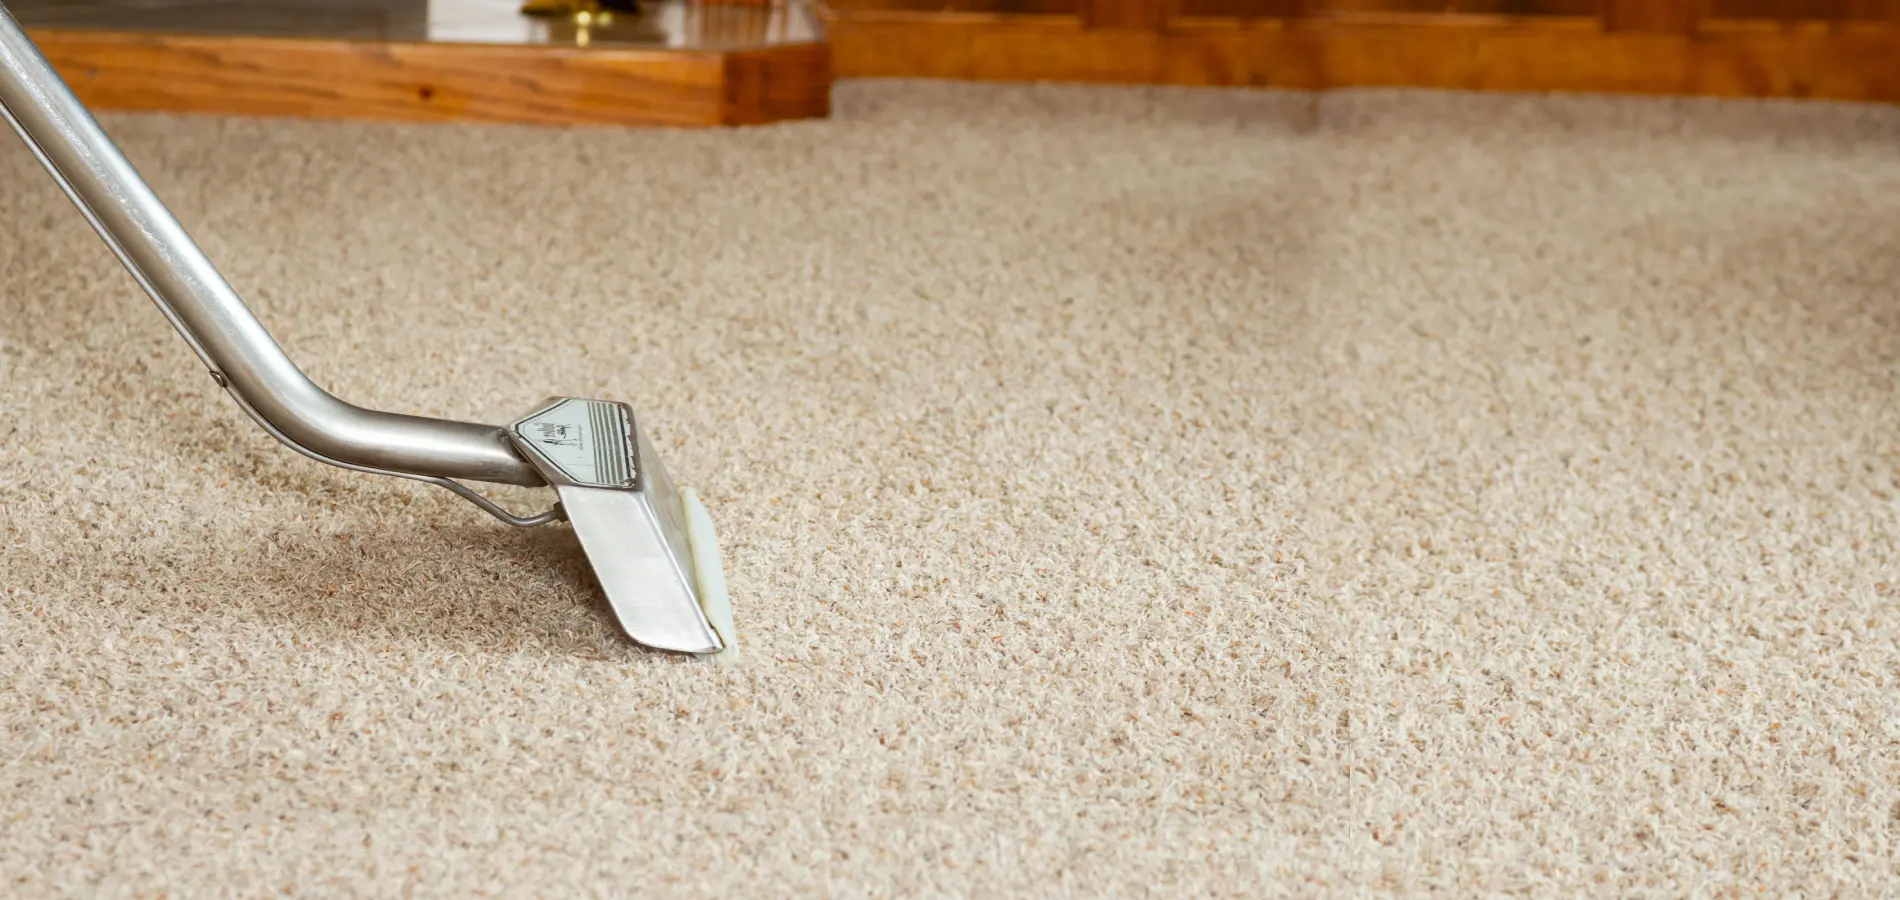 A carpet being cleaned with a tool on the floor.